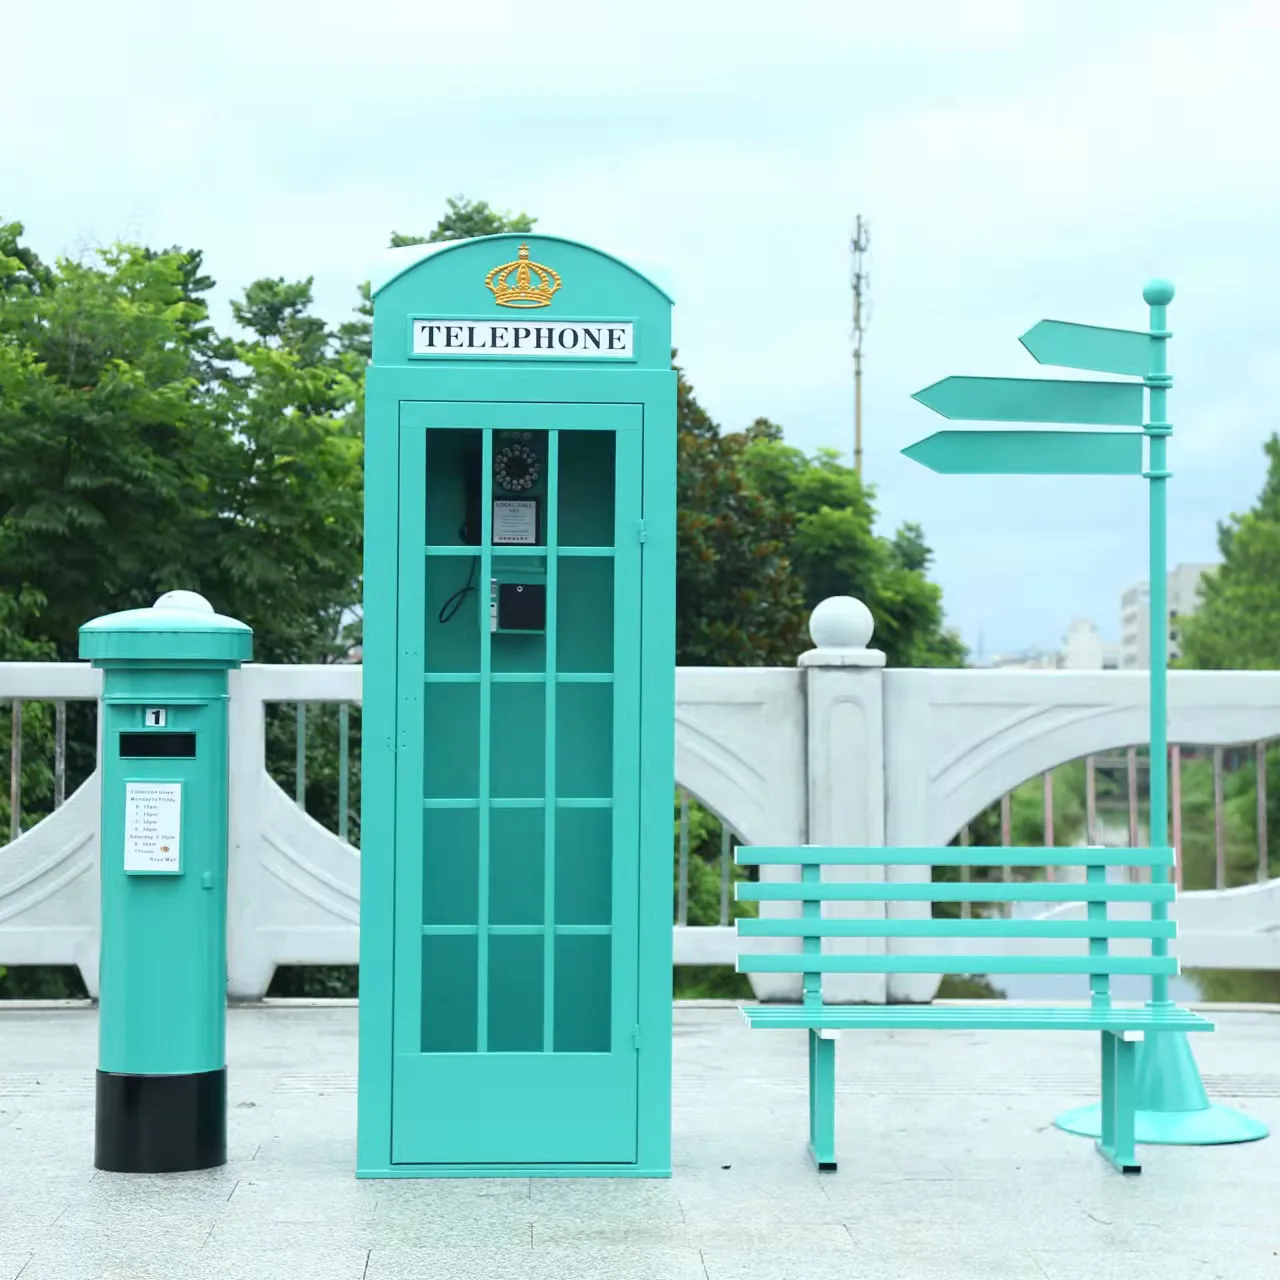 M927 New Art hotel decoration road pink green luxury telephone booth for flower arrangement wedding props